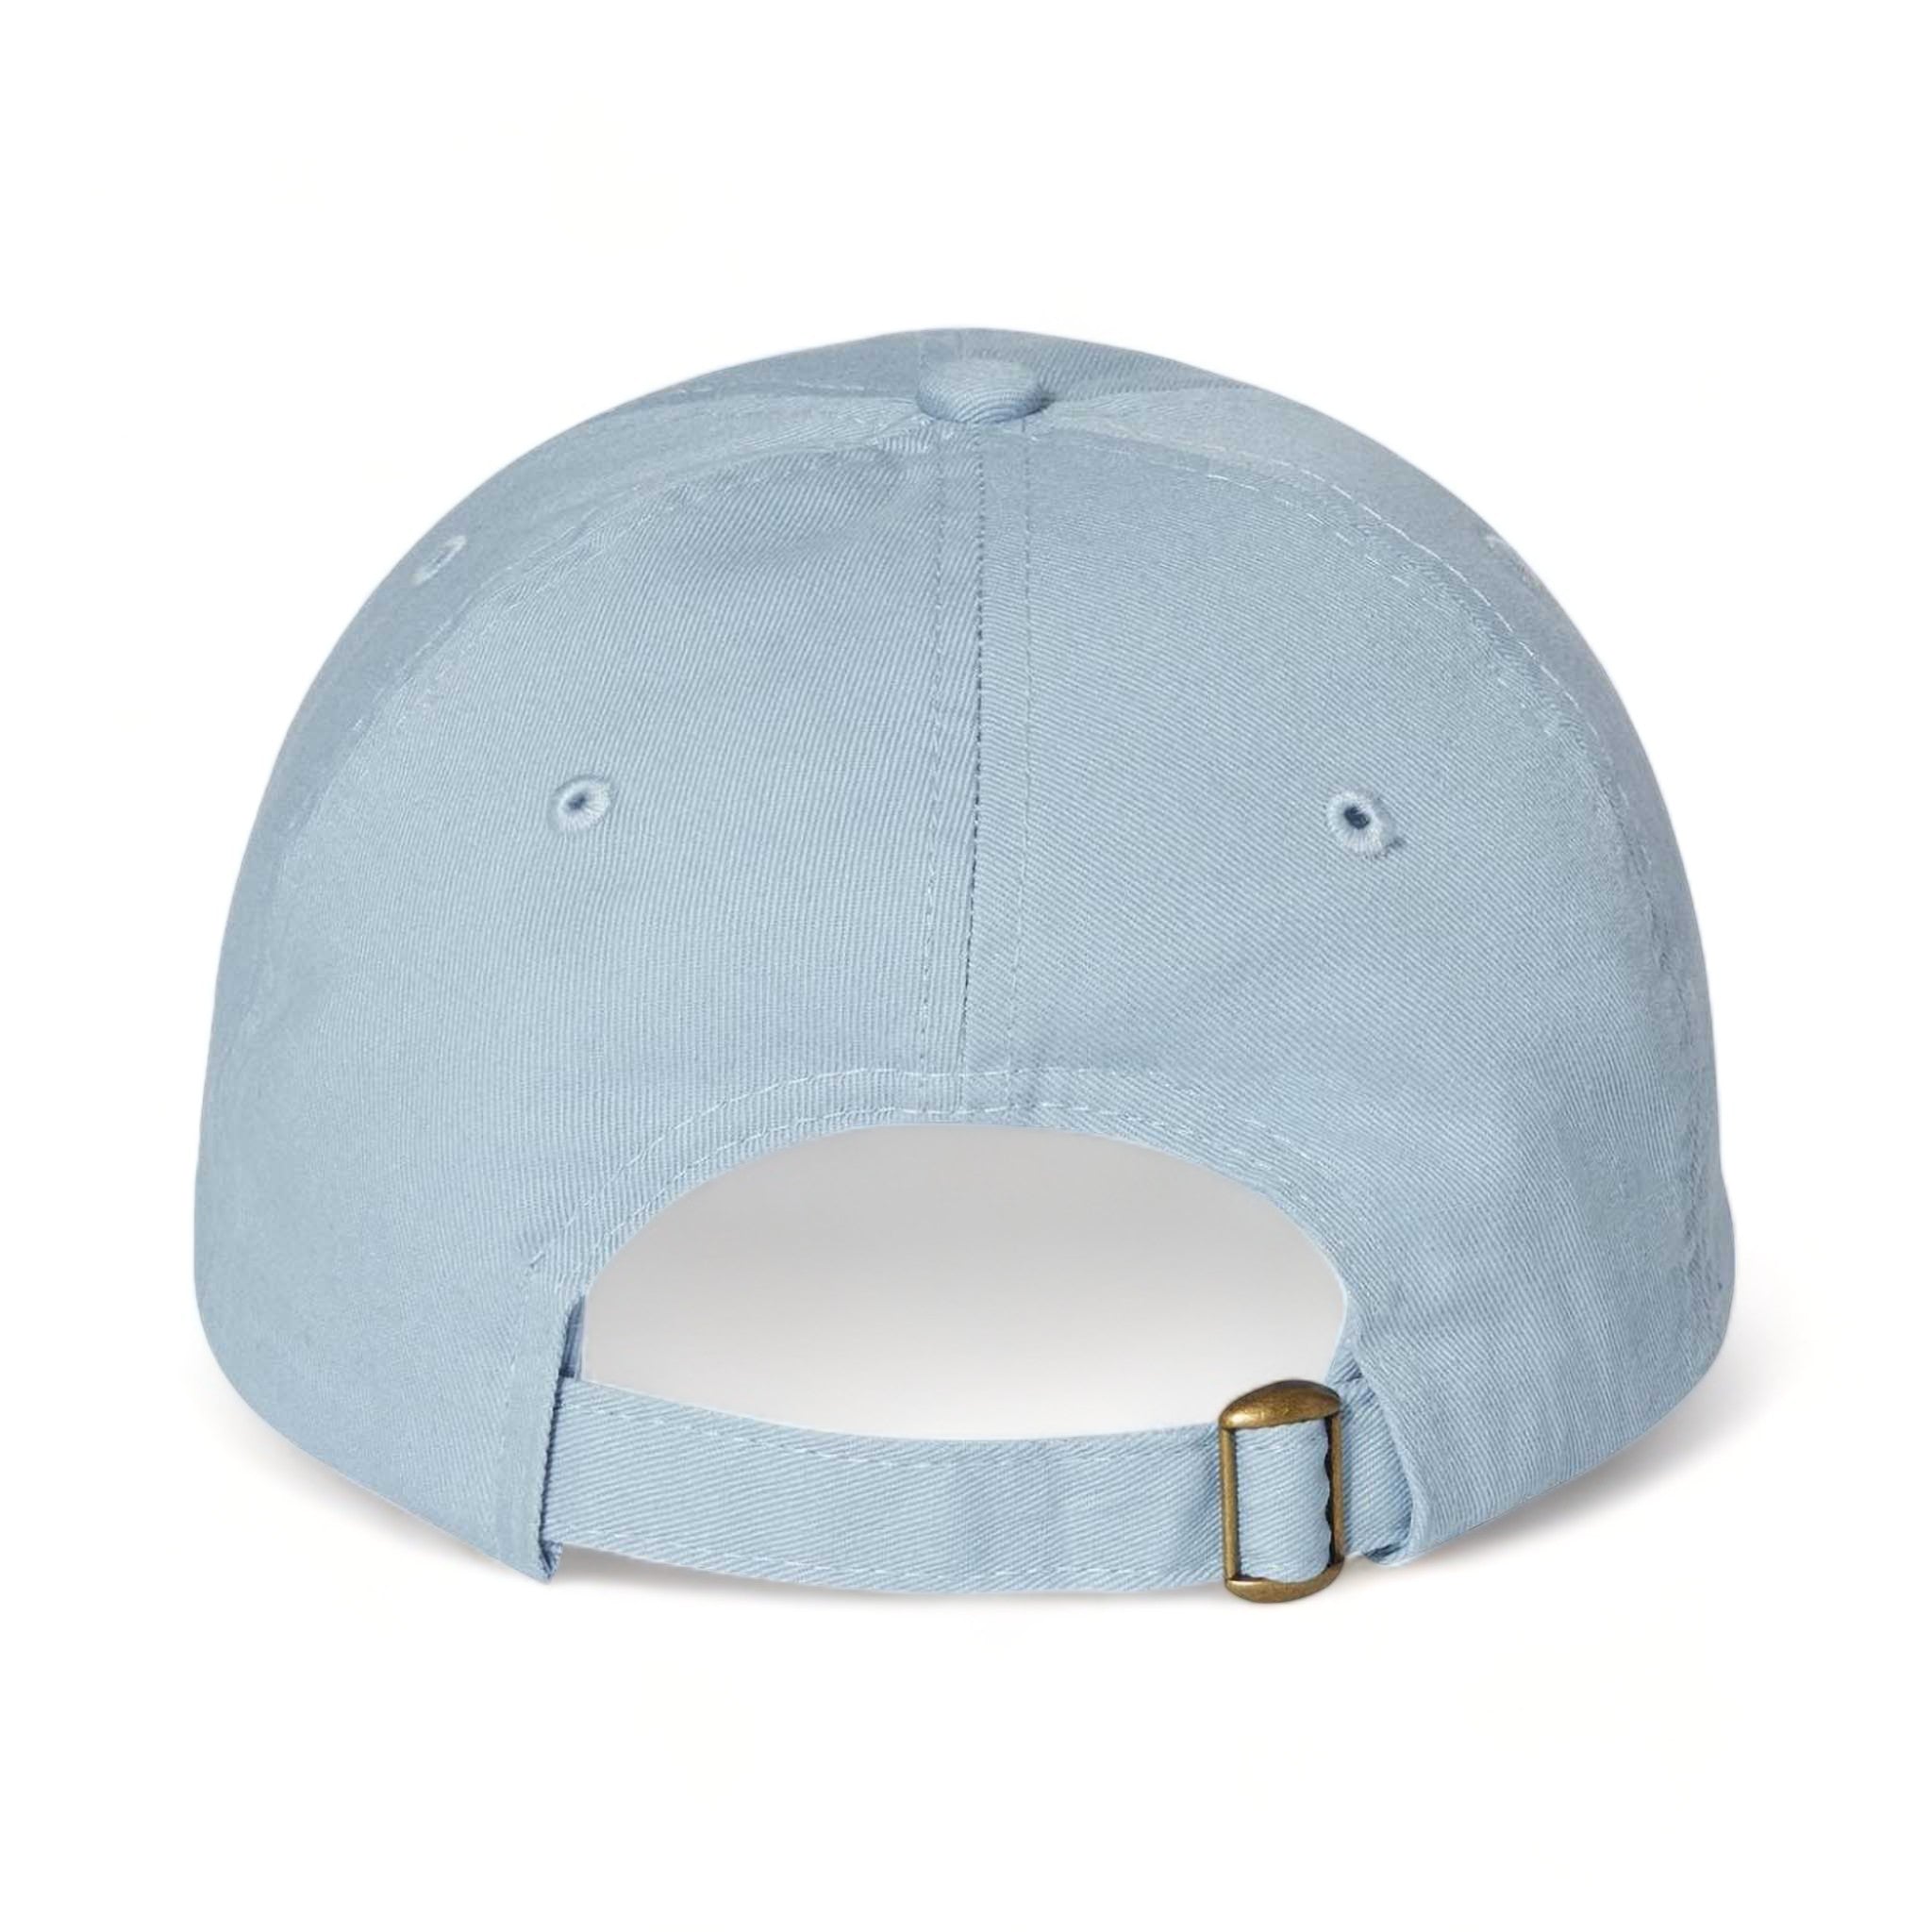 Back view of Valucap VC300A custom hat in baby blue